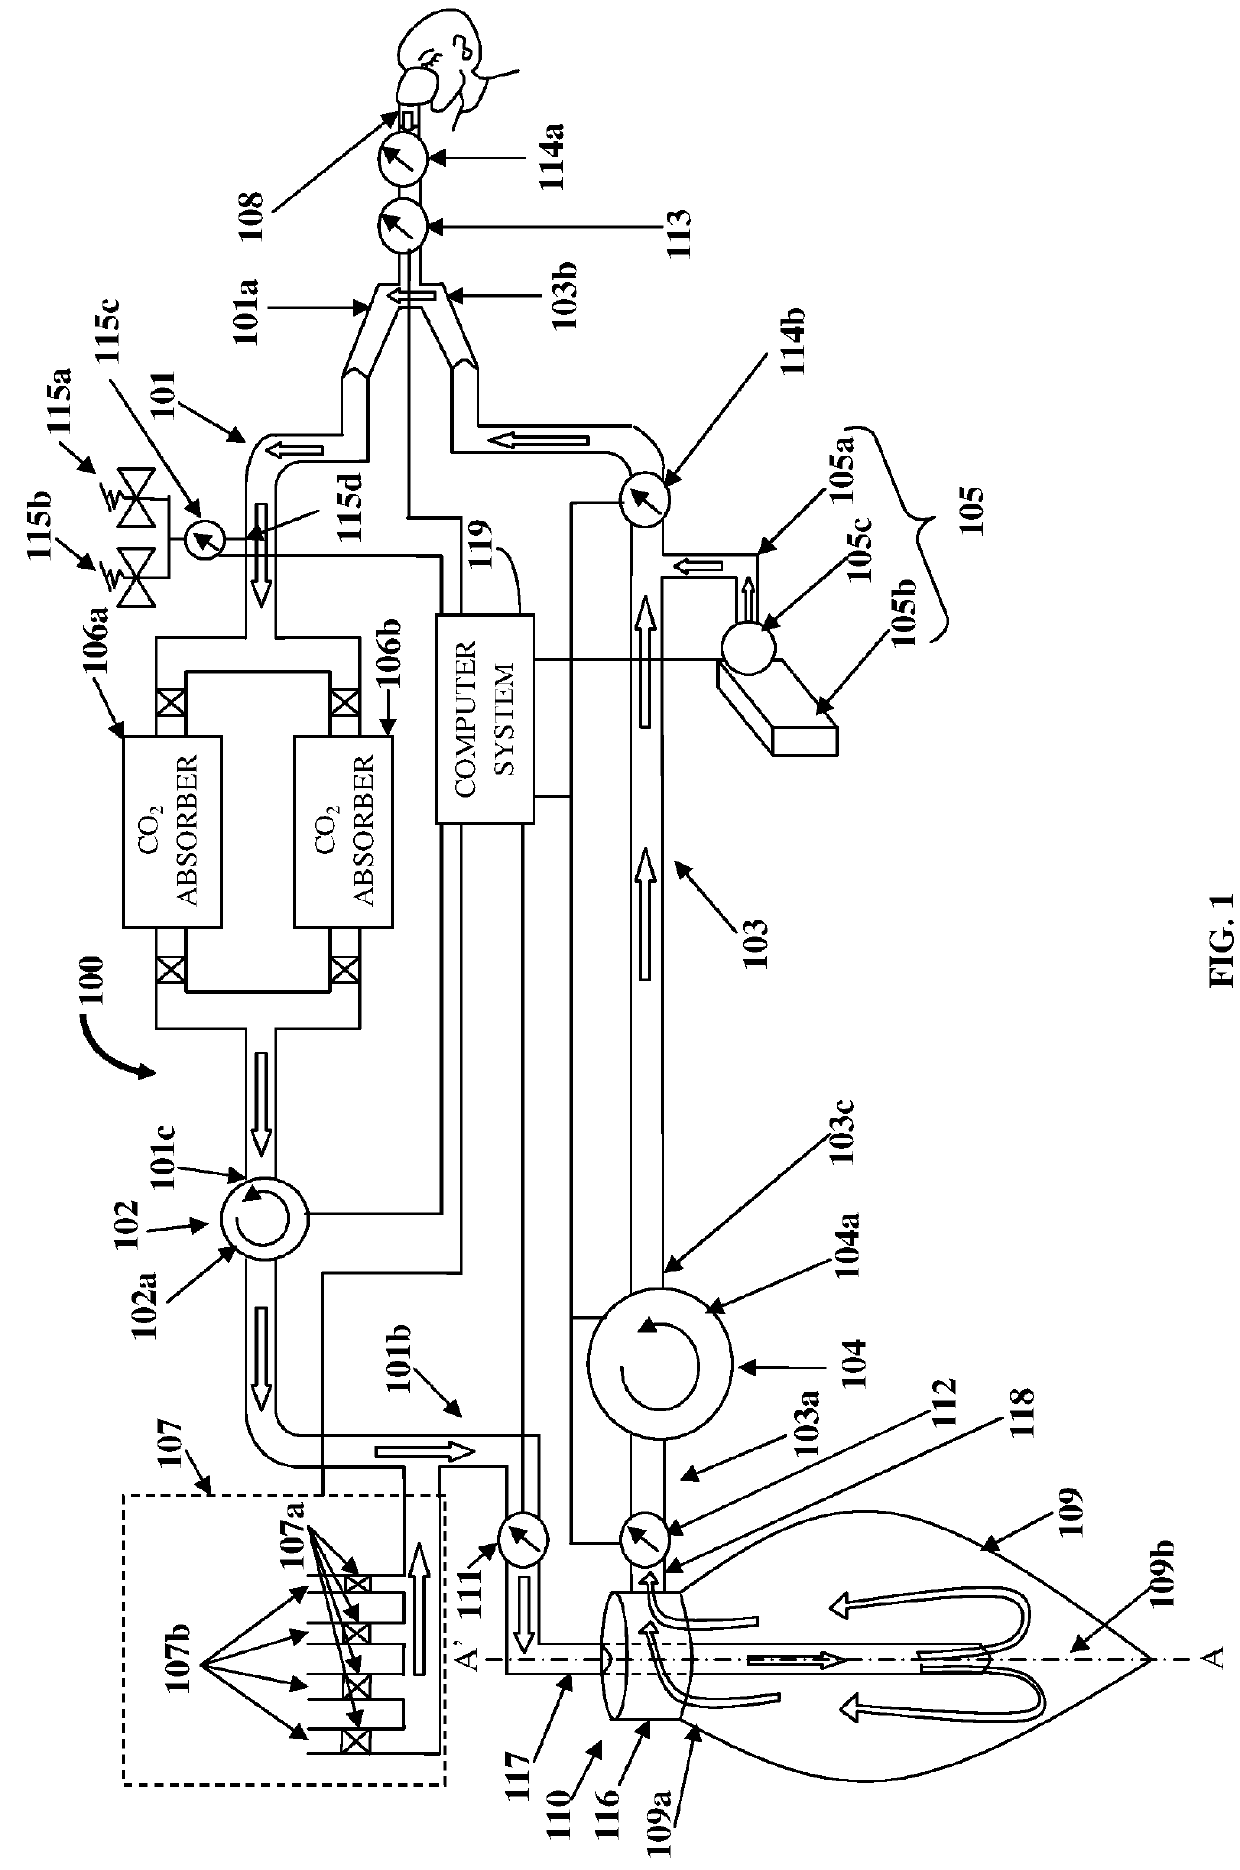 Anesthesia Delivery And Ventilation System